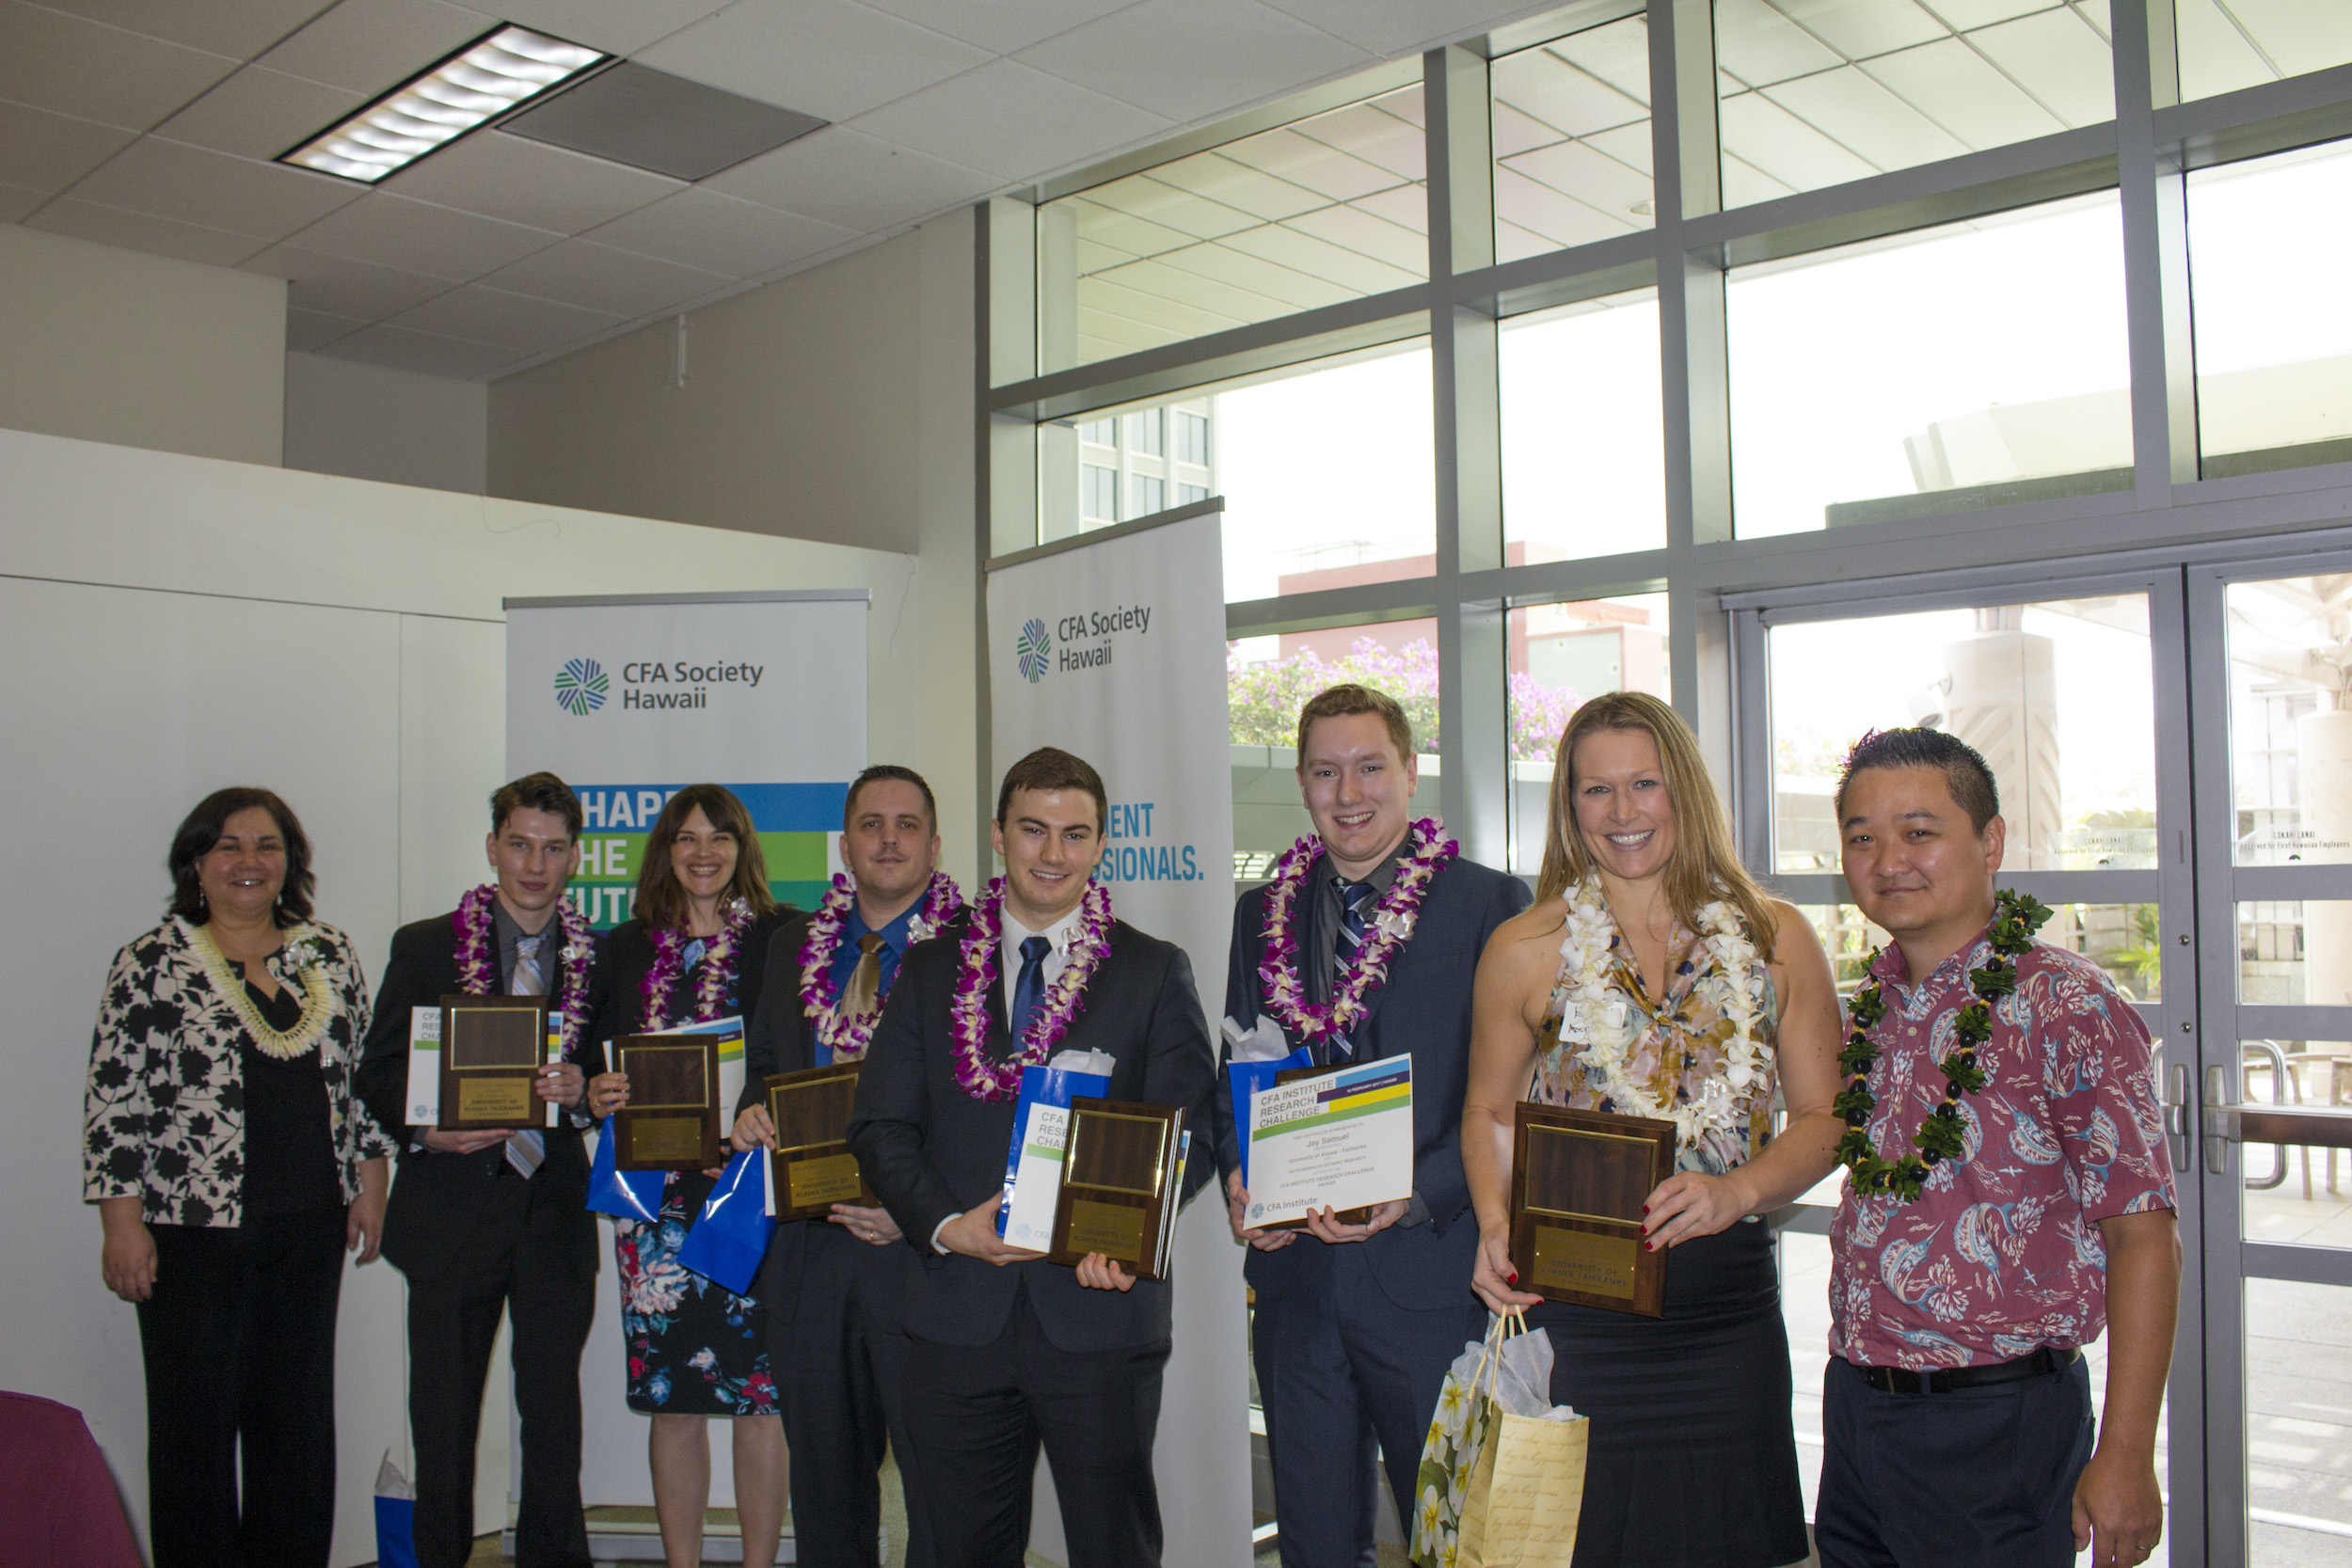 Kim McGinnis (second from right) displays the CFA (Chartered Financial Analyst) Institute Research Challenge Awards given to students at the CFA Society Hawaii Conference in February 2017.